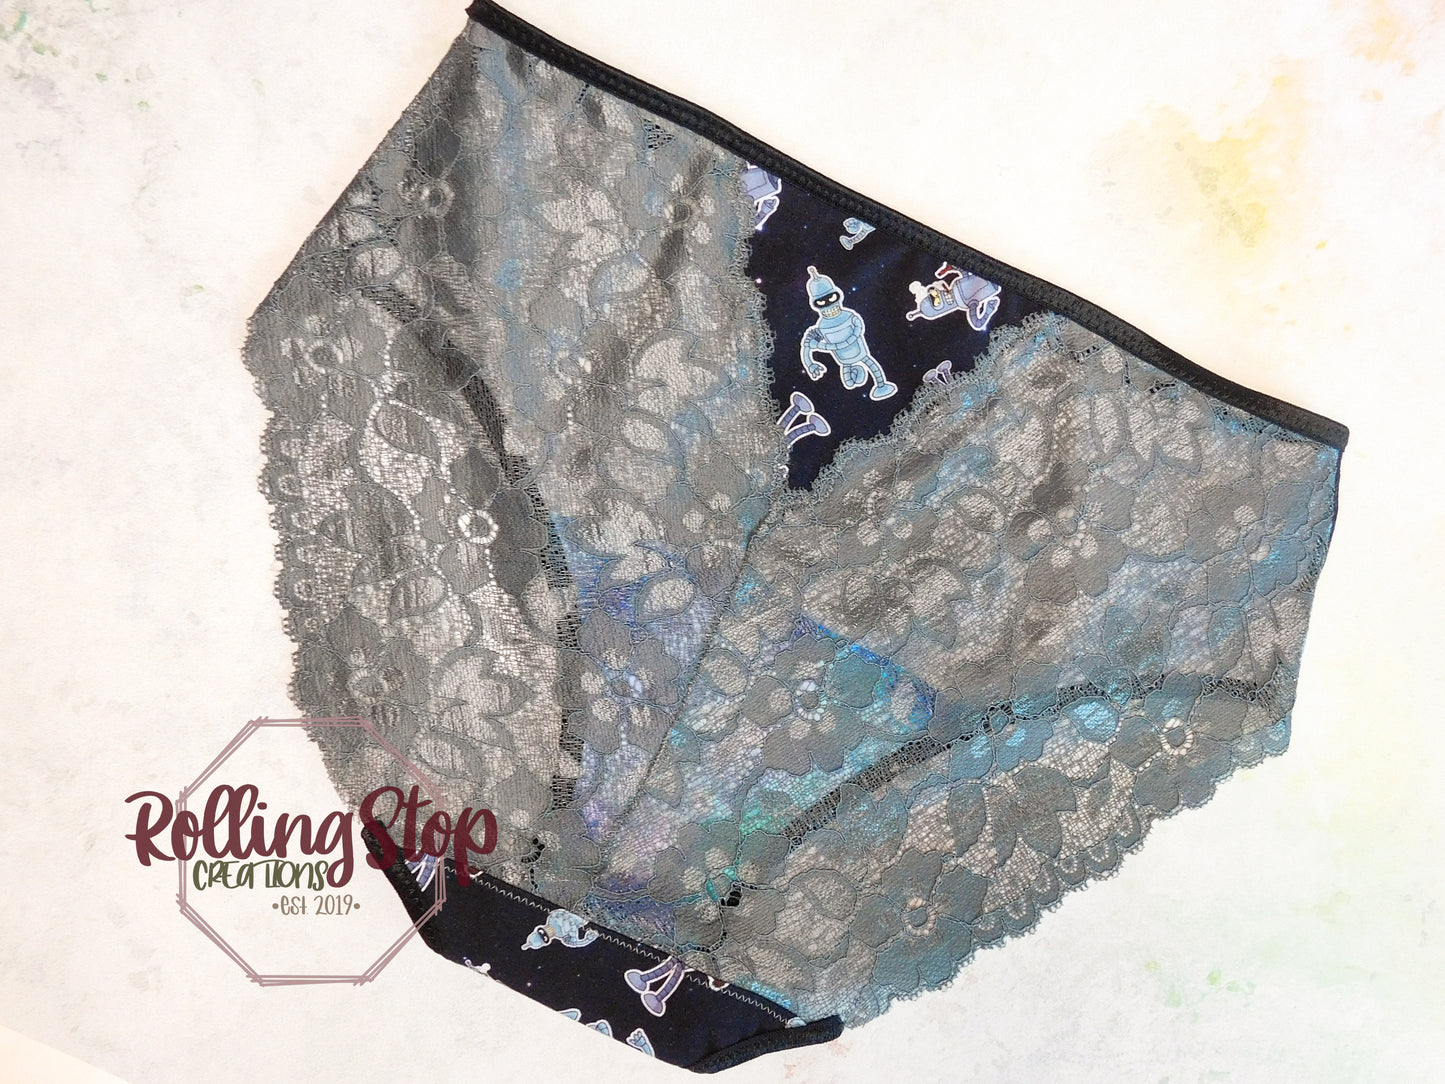 Bite Me Lace Back Pantydrawls by Rolling Stop Creations sold by Rolling Stop Creations Lace - Lingerie - Panties - Pant